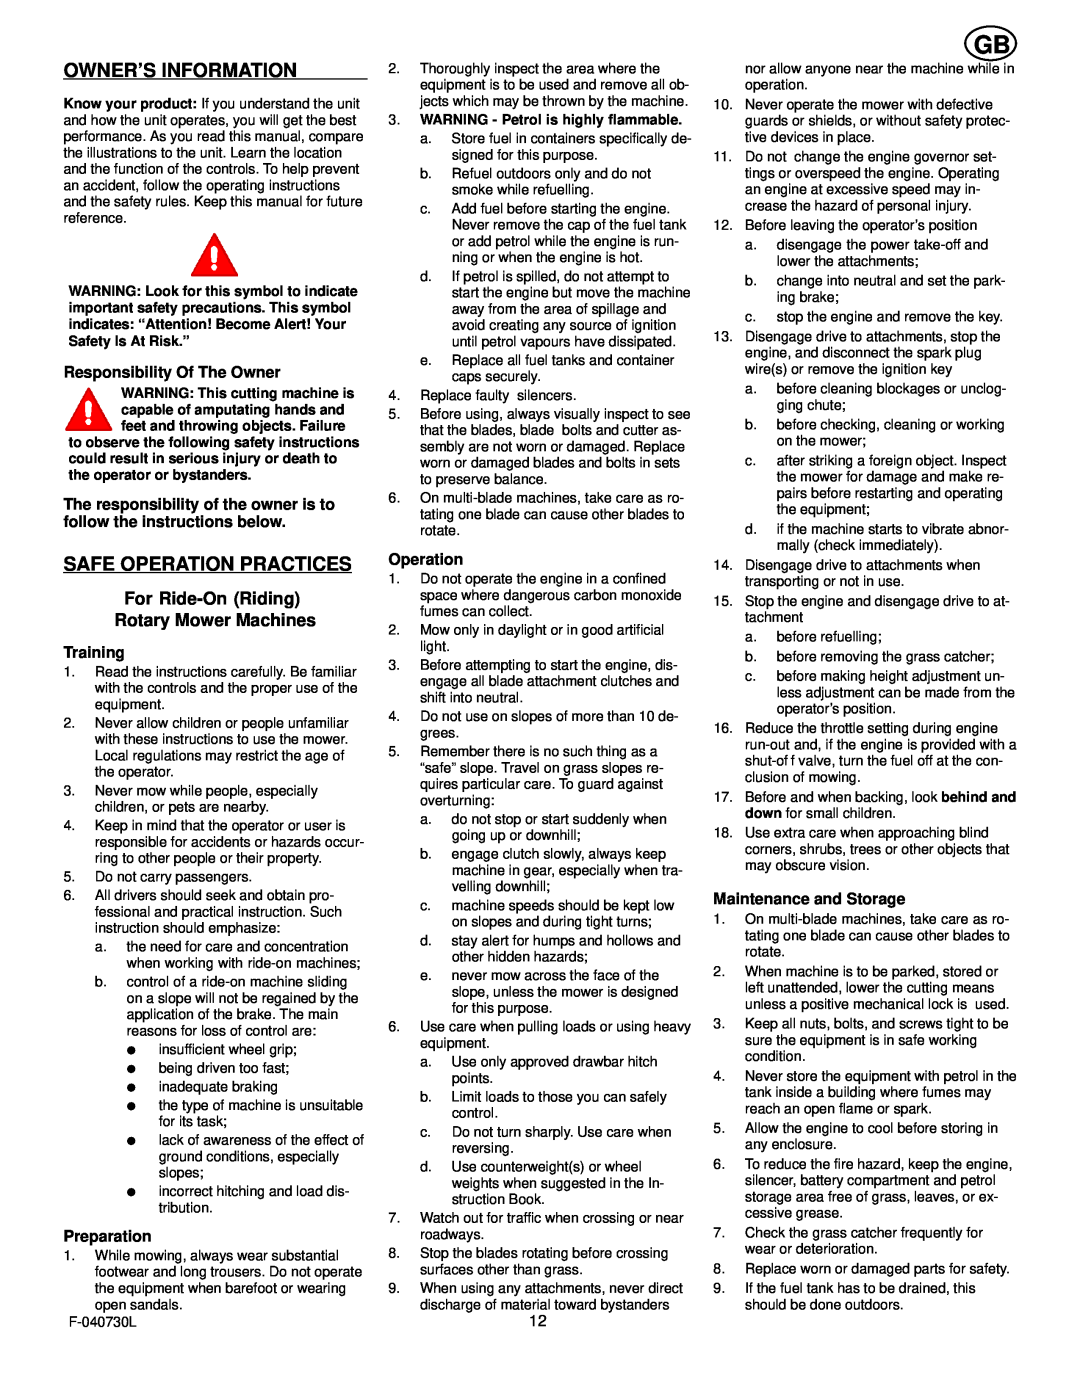 Hayter Mowers E131B manual Owner’S Information, Safe Operation Practices, For Ride-On Riding Rotary Mower Machines 